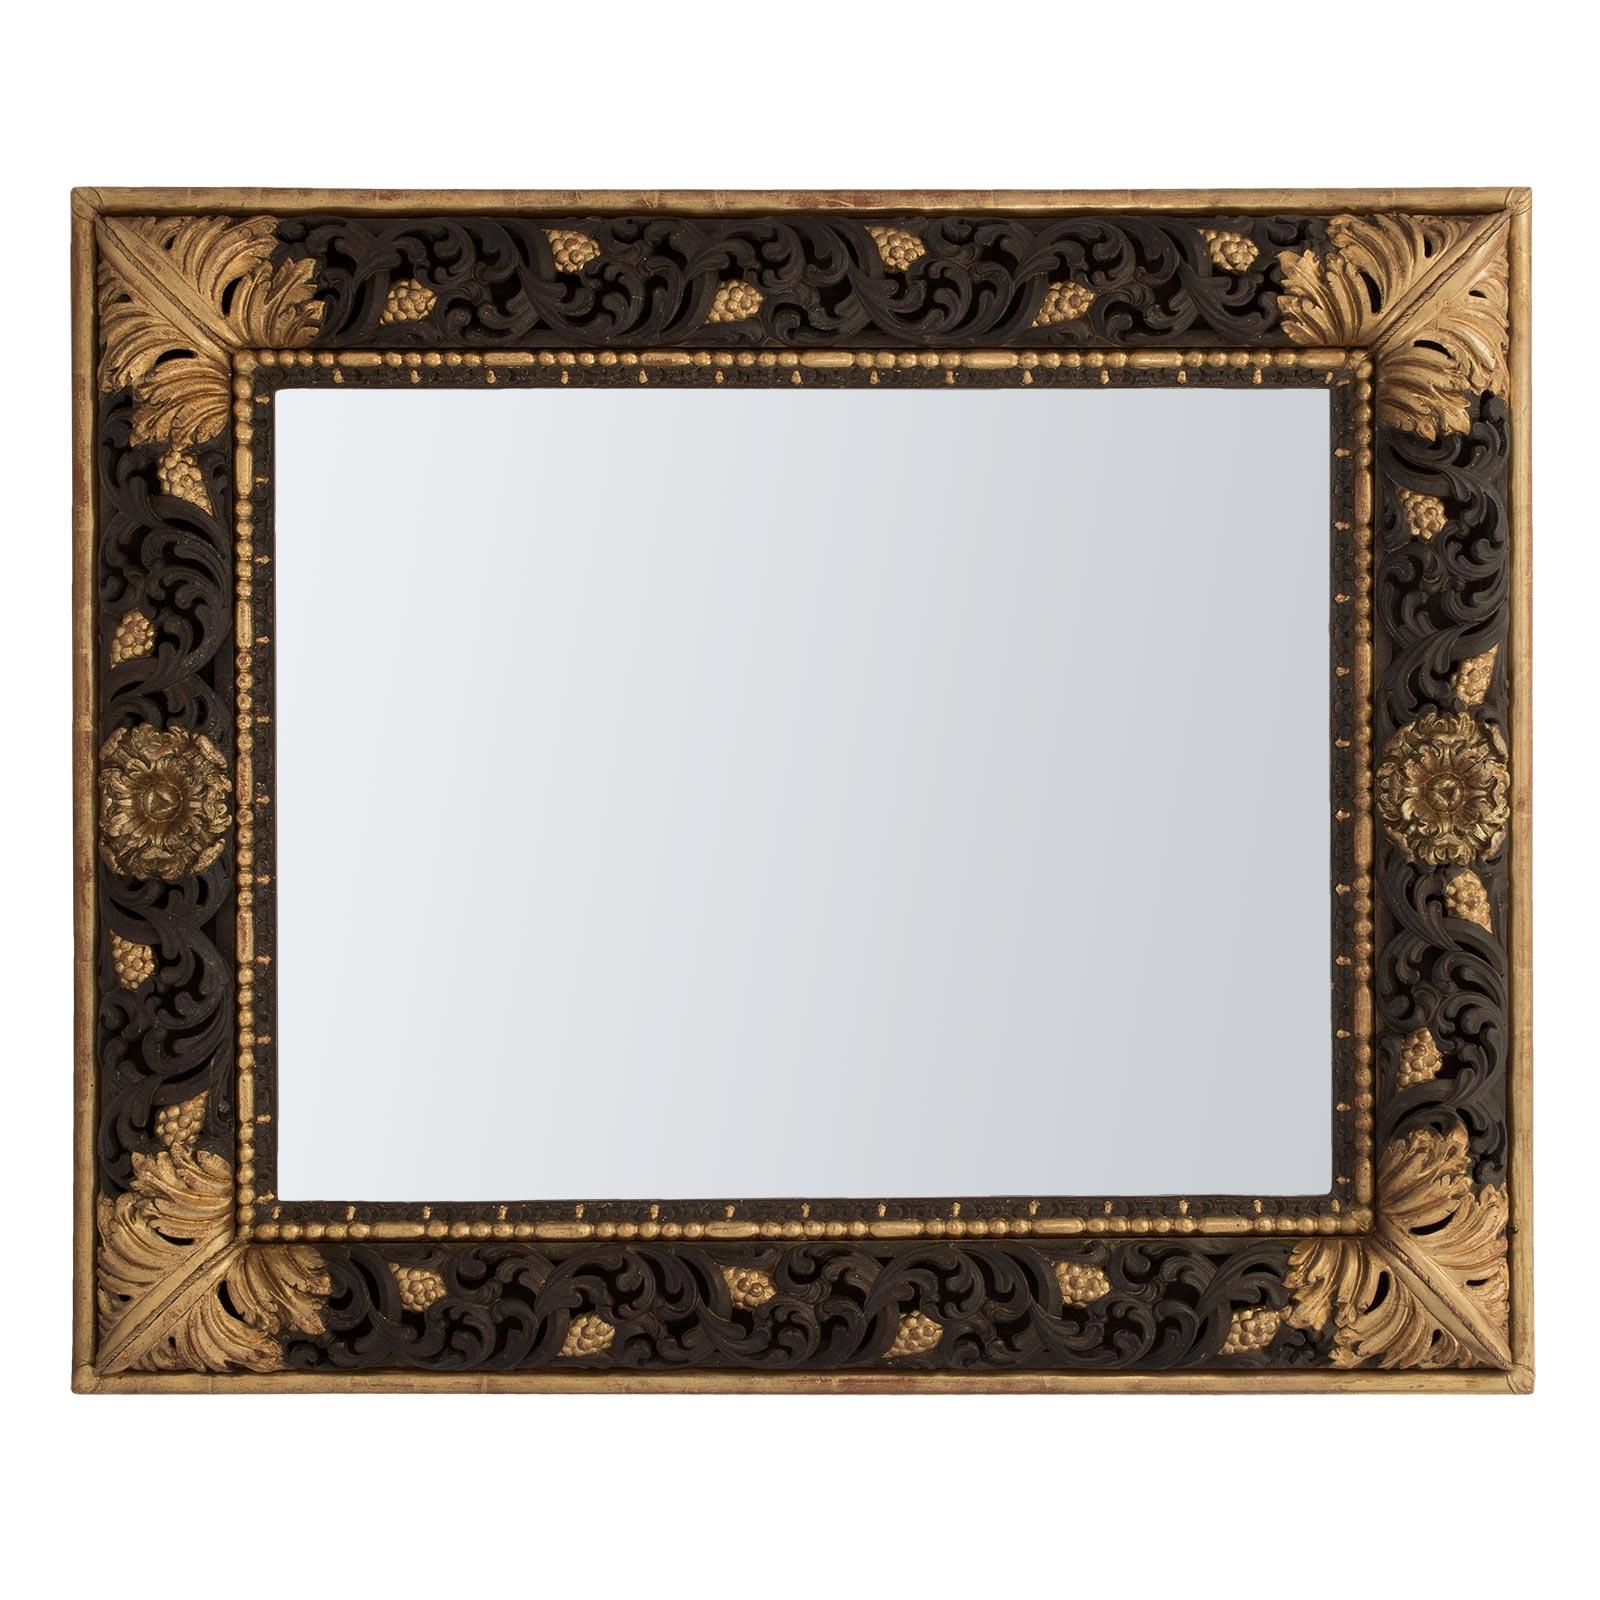 A fanciful Italian 19th century Baroque st. polychrome and gilt rectangular mirror. The mirror frame has a wonderfully decorative pierced convex design in a chocolate brown polychrome finish of a scrolled pattern amidst gilt burnished grape